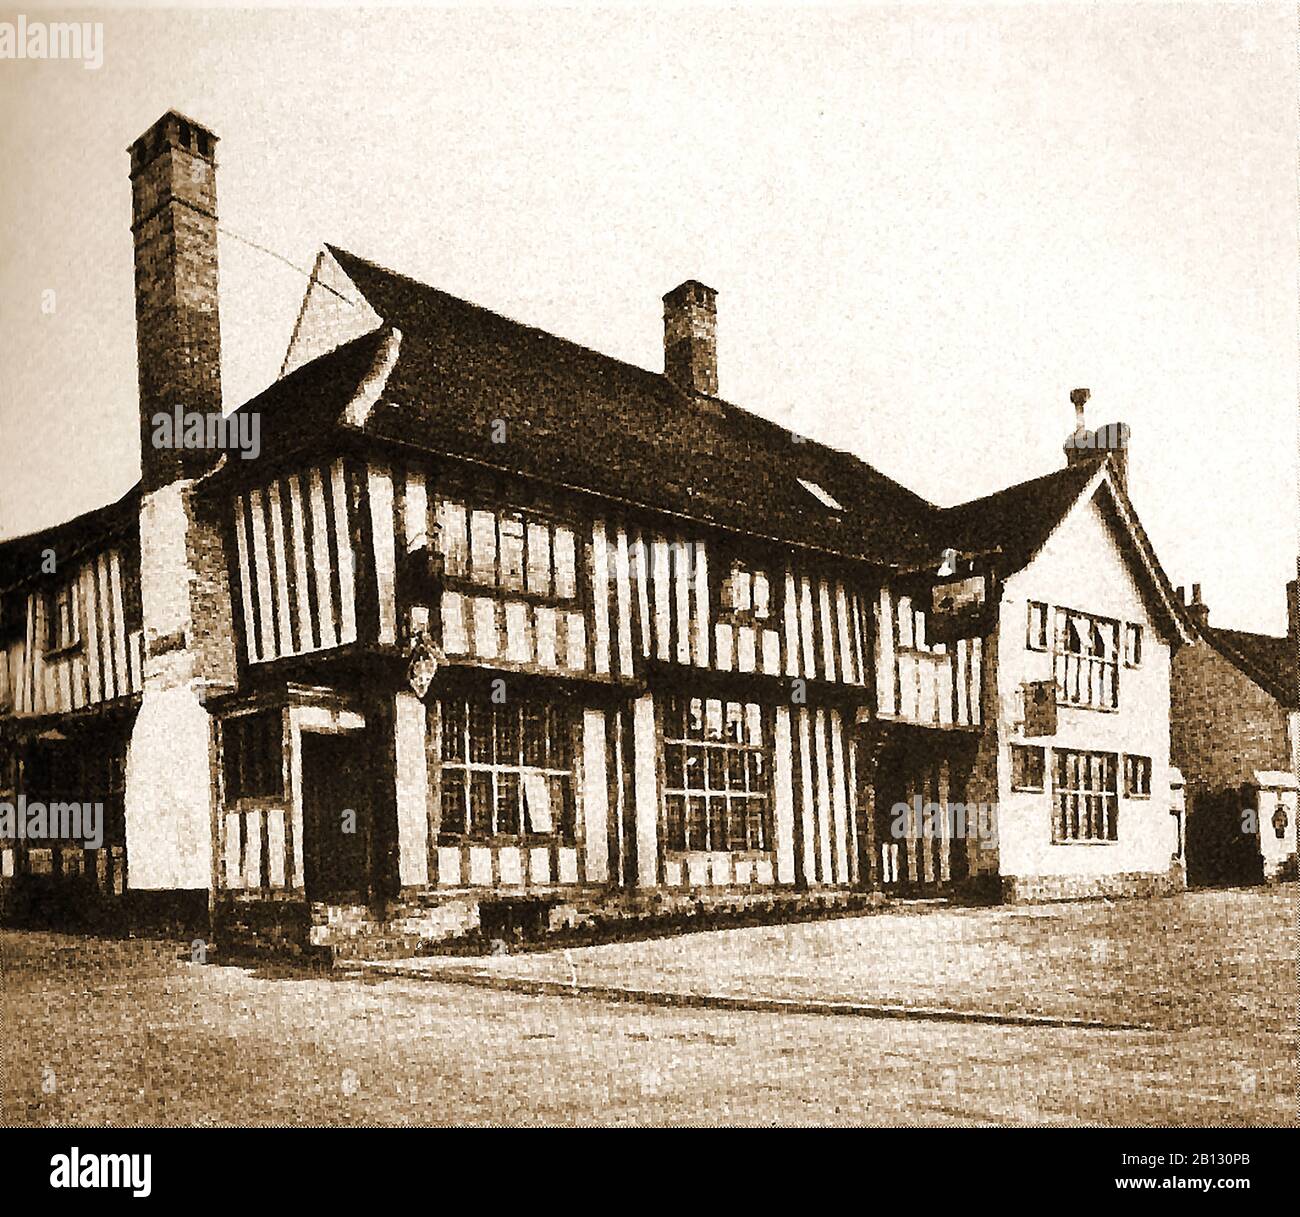 c 1940's -  An old photograph of the historic timbered Bull Inn at Long Melford , a Suffolk village in England(Originally a Merchant's House built in 1450 and later a coaching inn) . The ghost of Richard Evered who was stabbed to death in the hotel  in 1648 is said to still haunt the hotels halls, rooms (particularly room 4)  and corridors. A beam in the lounge is carved with the image of a ‘Wildman’ or ‘Woodwose, a similar  mythical being like the green man, but with a full body. Stock Photo